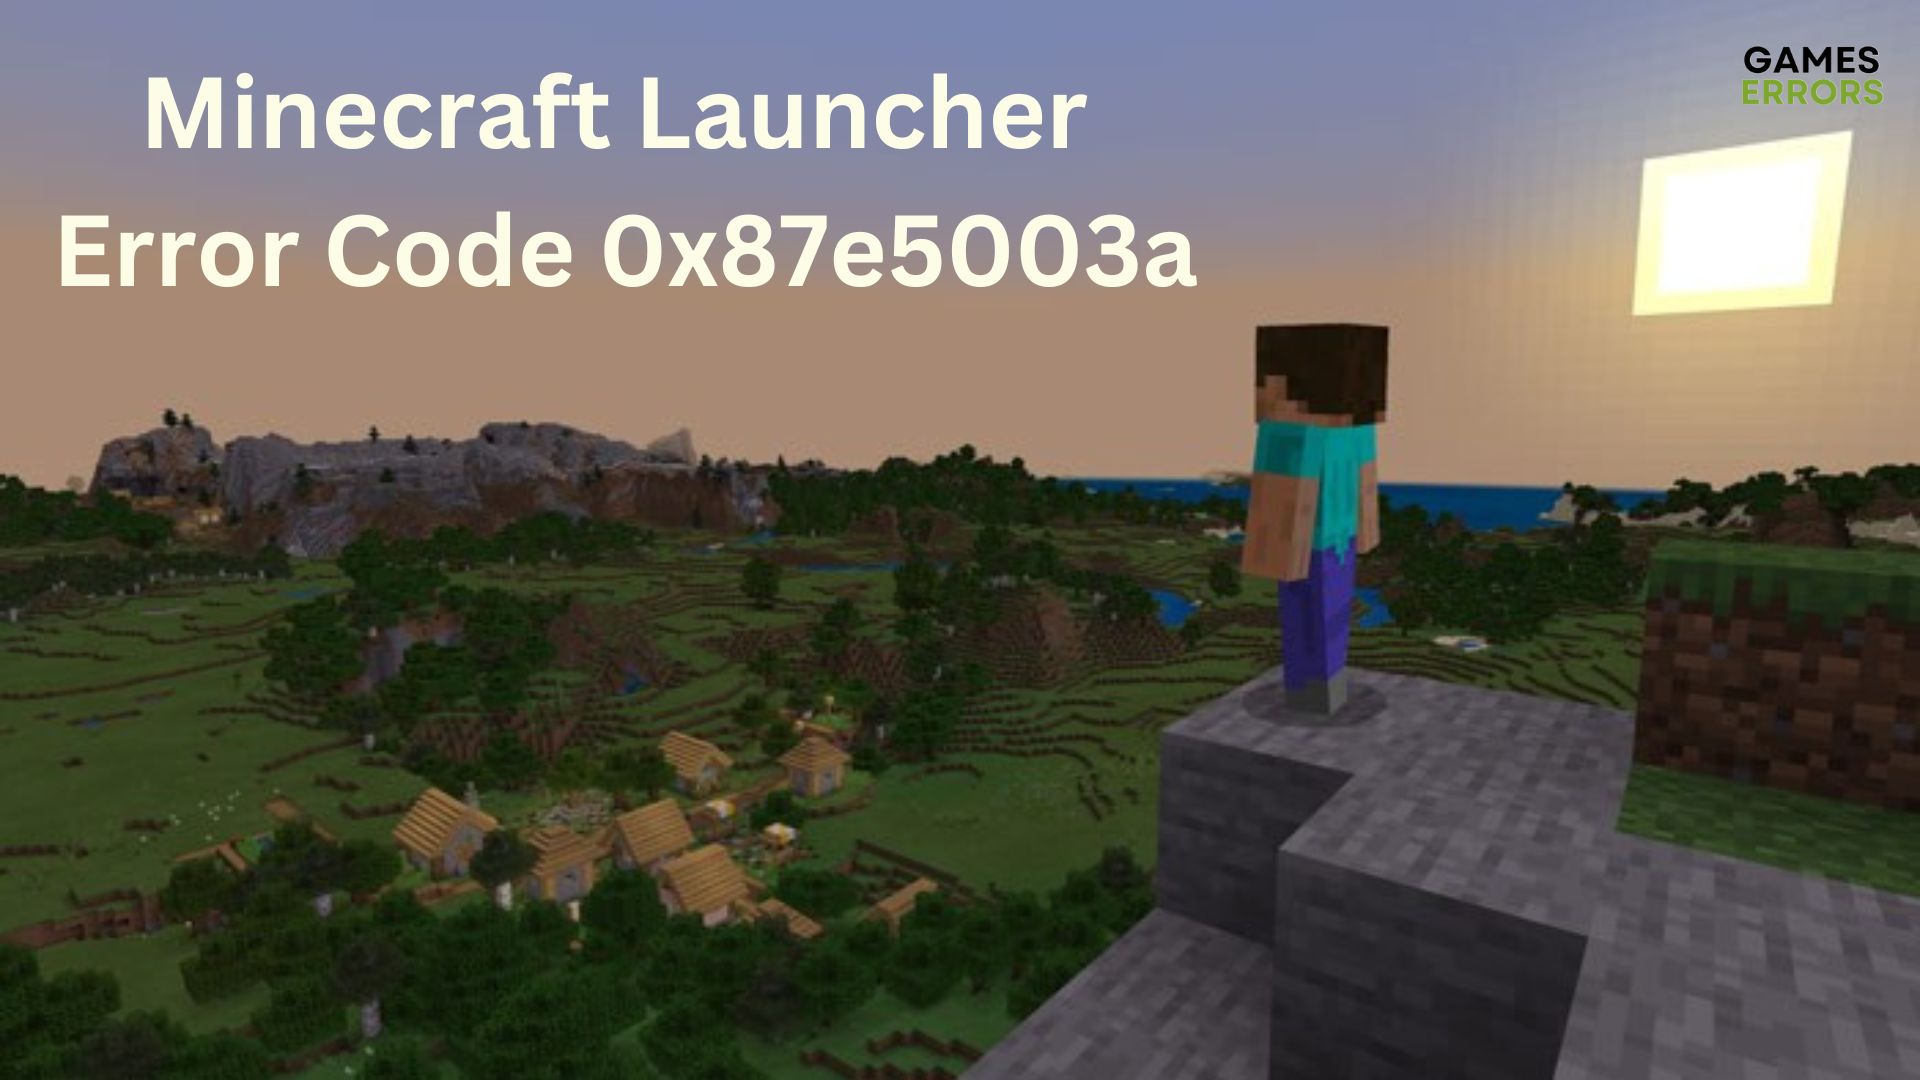 Minecraft Launcher Error Code 0x87e5003a: Try These Fixes